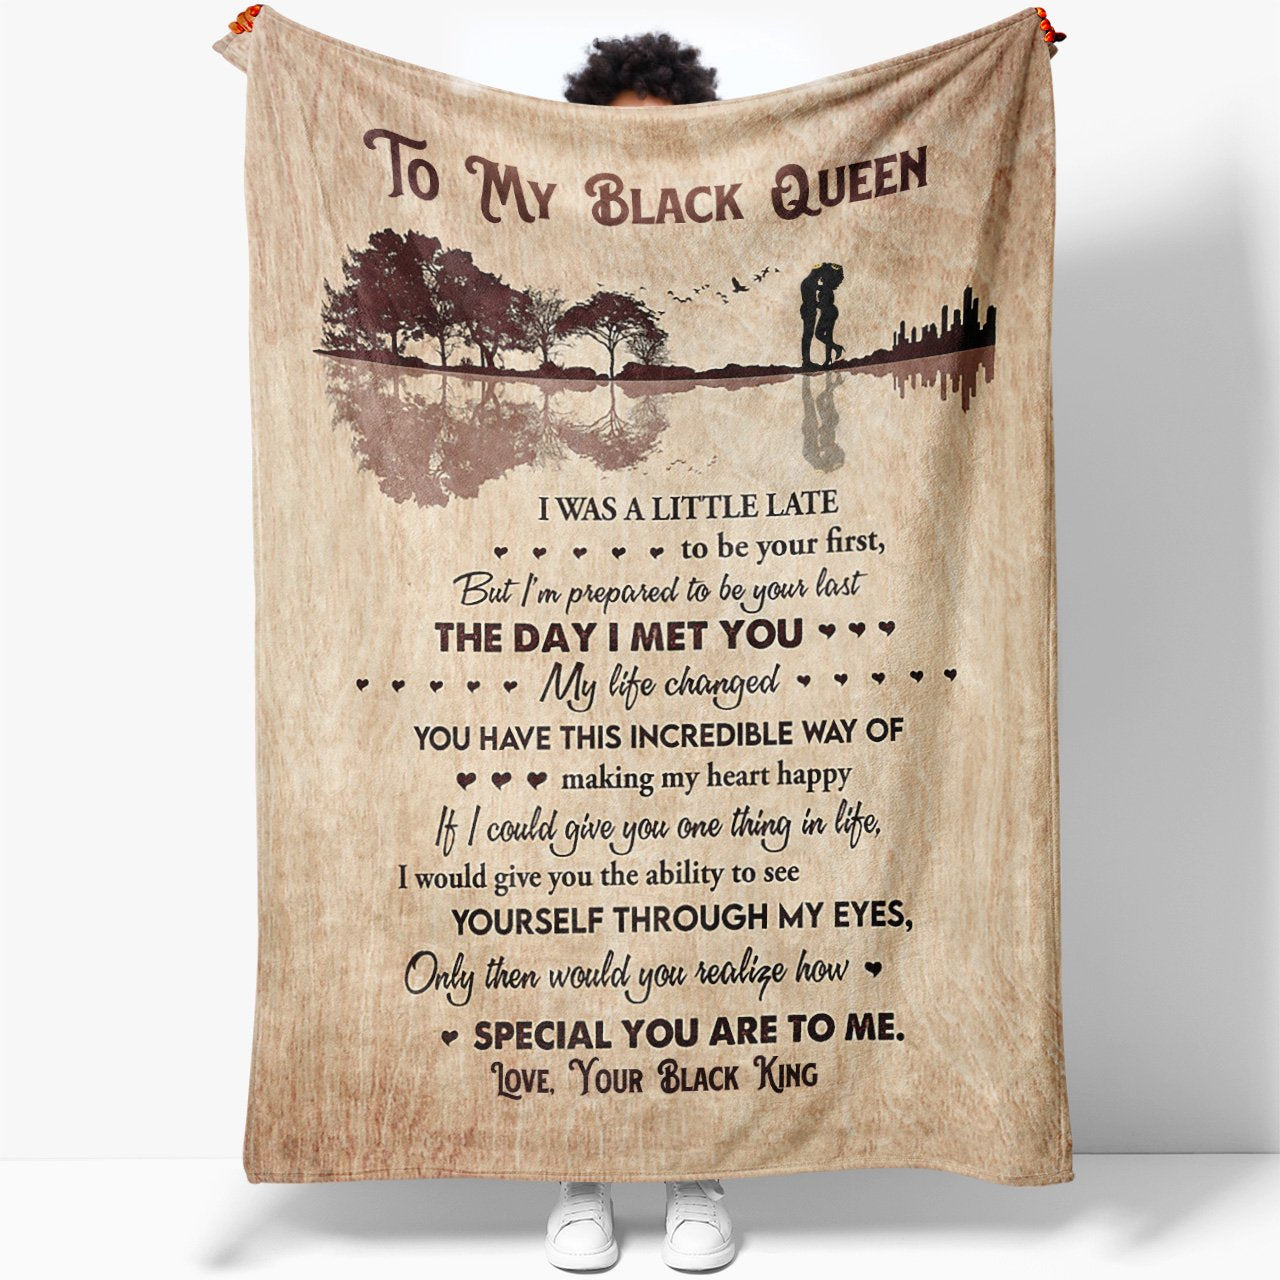 To My Black Queen Wife Blanket Gift, The Day I Met You My Life Changed Black for Her, Anniversary Gift Ideas For Her, Valentine Gifts For Wife